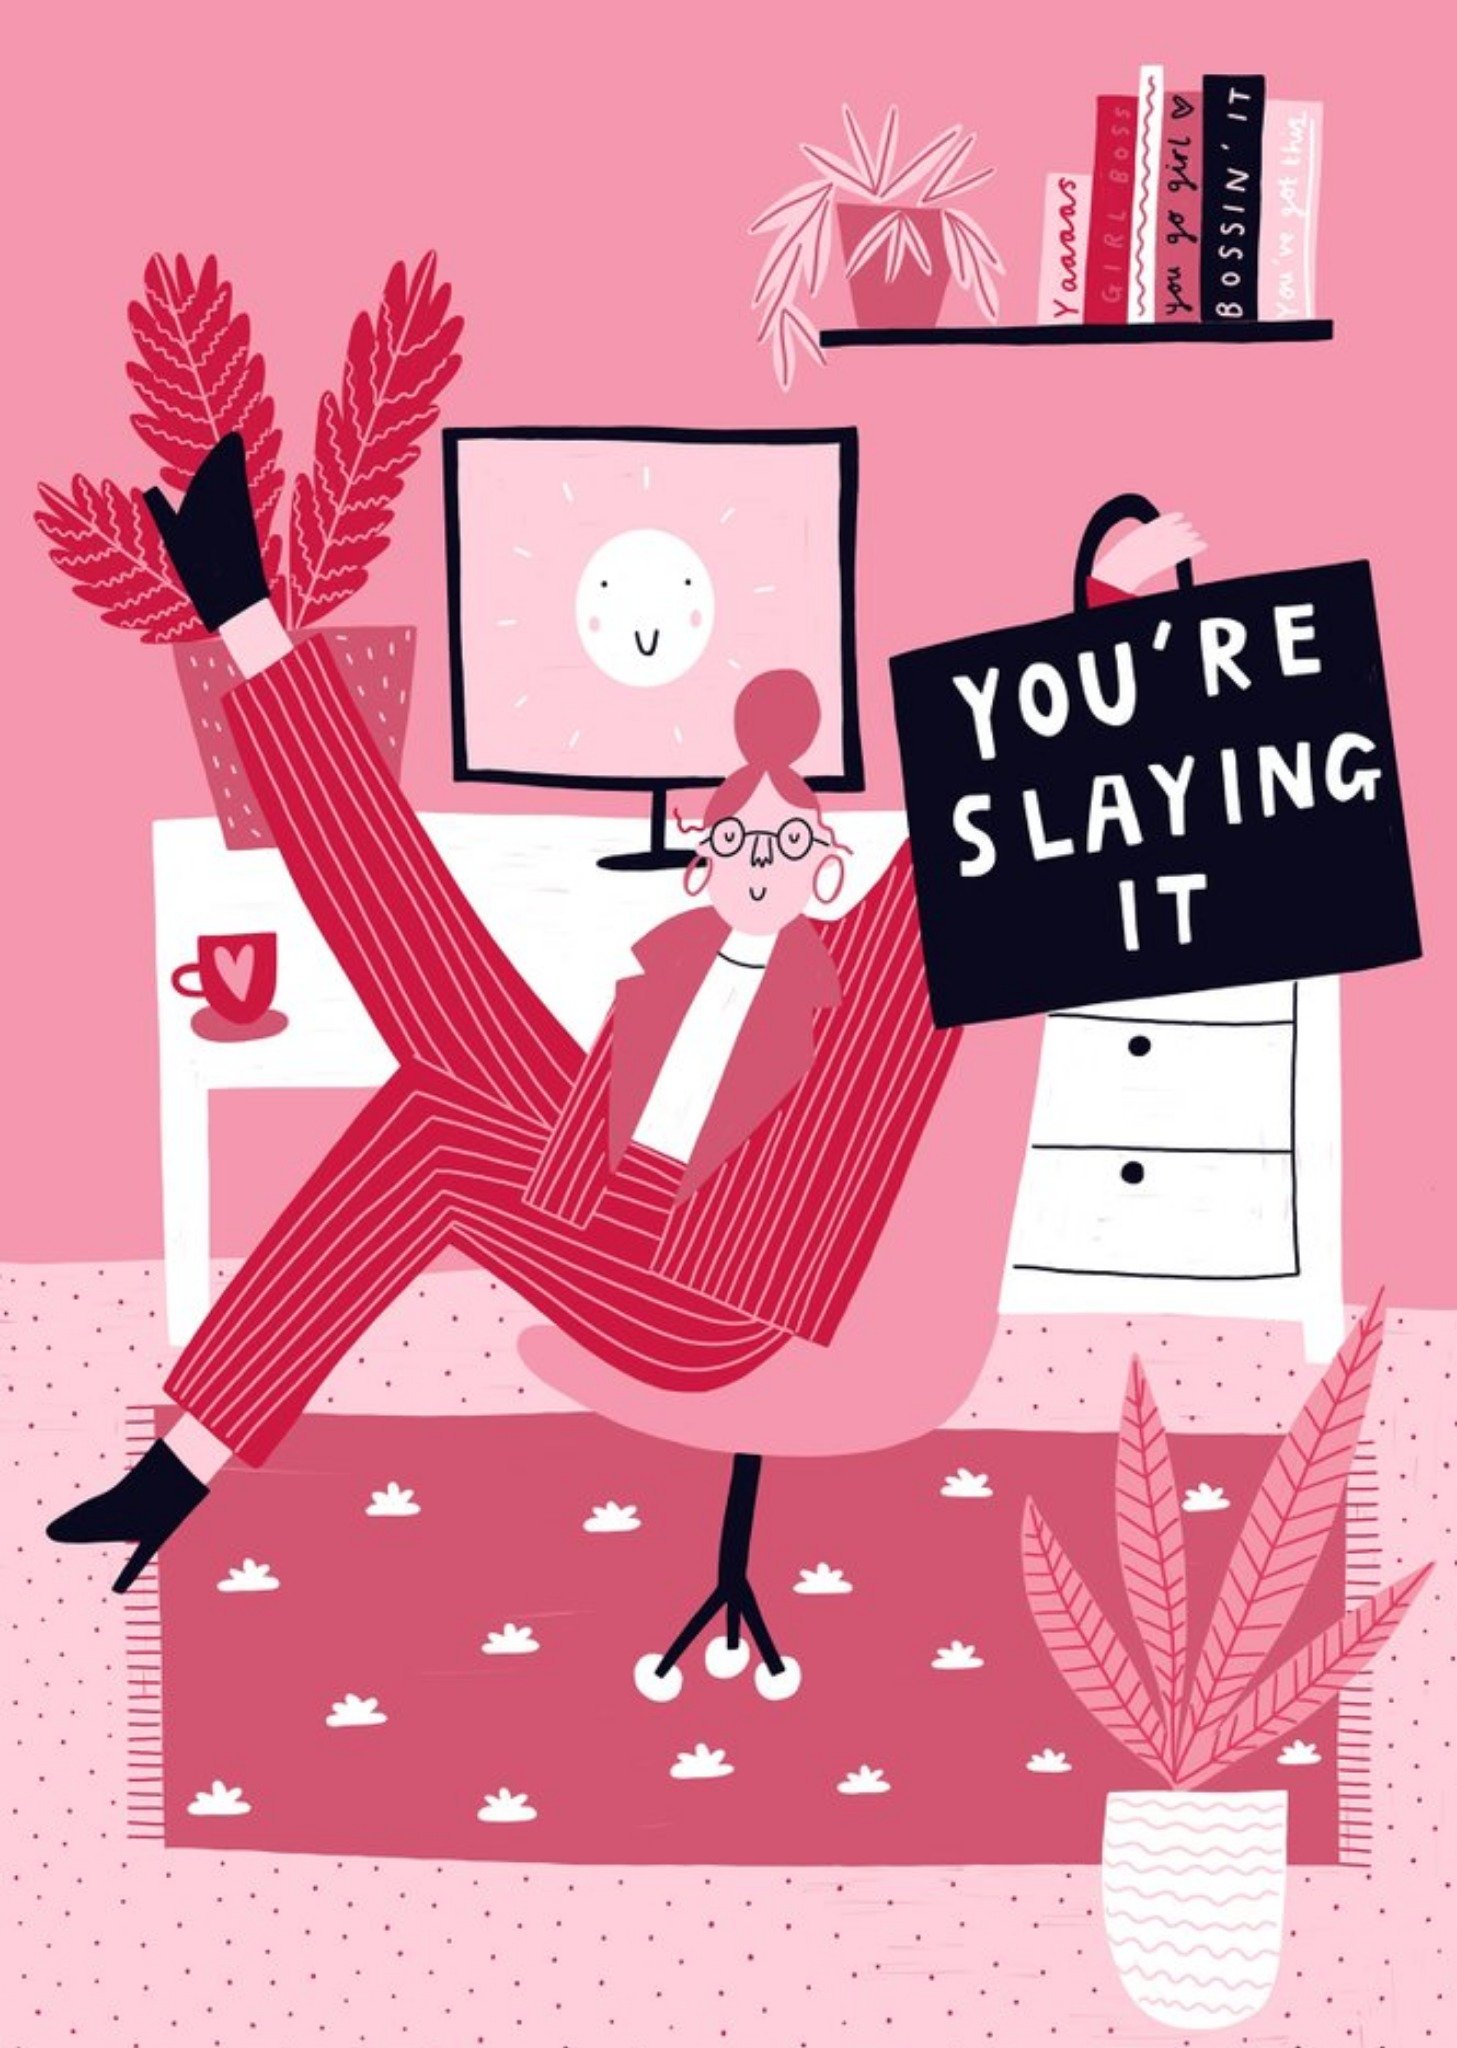 Moonpig Slaying It Character Illustration New Job Or Promotion Card By Lucy Maggie, Large